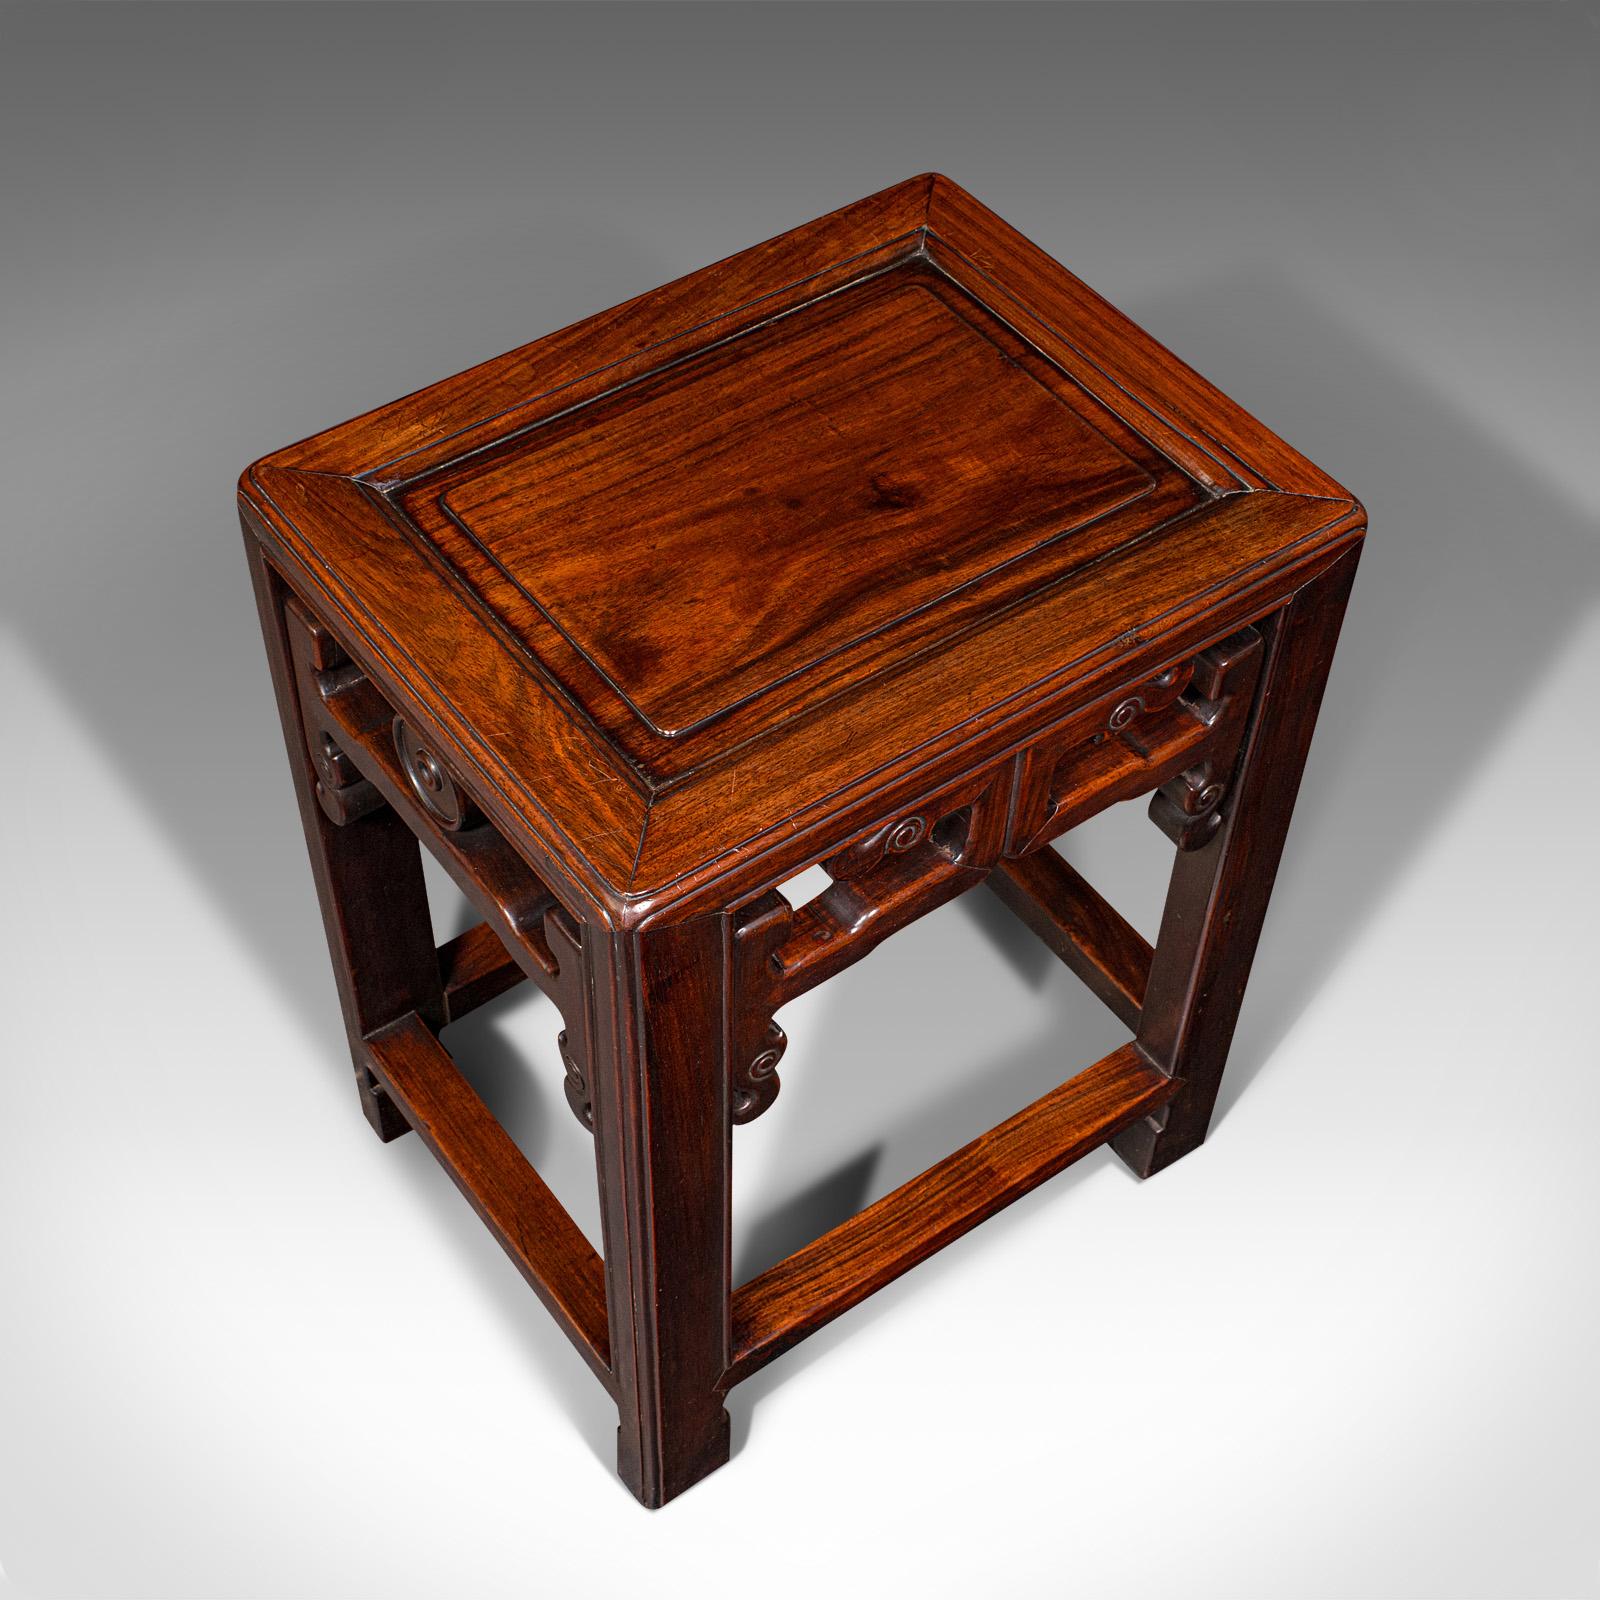 Wood Antique Occasional Table, Chinese, Lamp, Jardiniere Stand, Victorian, Circa 1900 For Sale